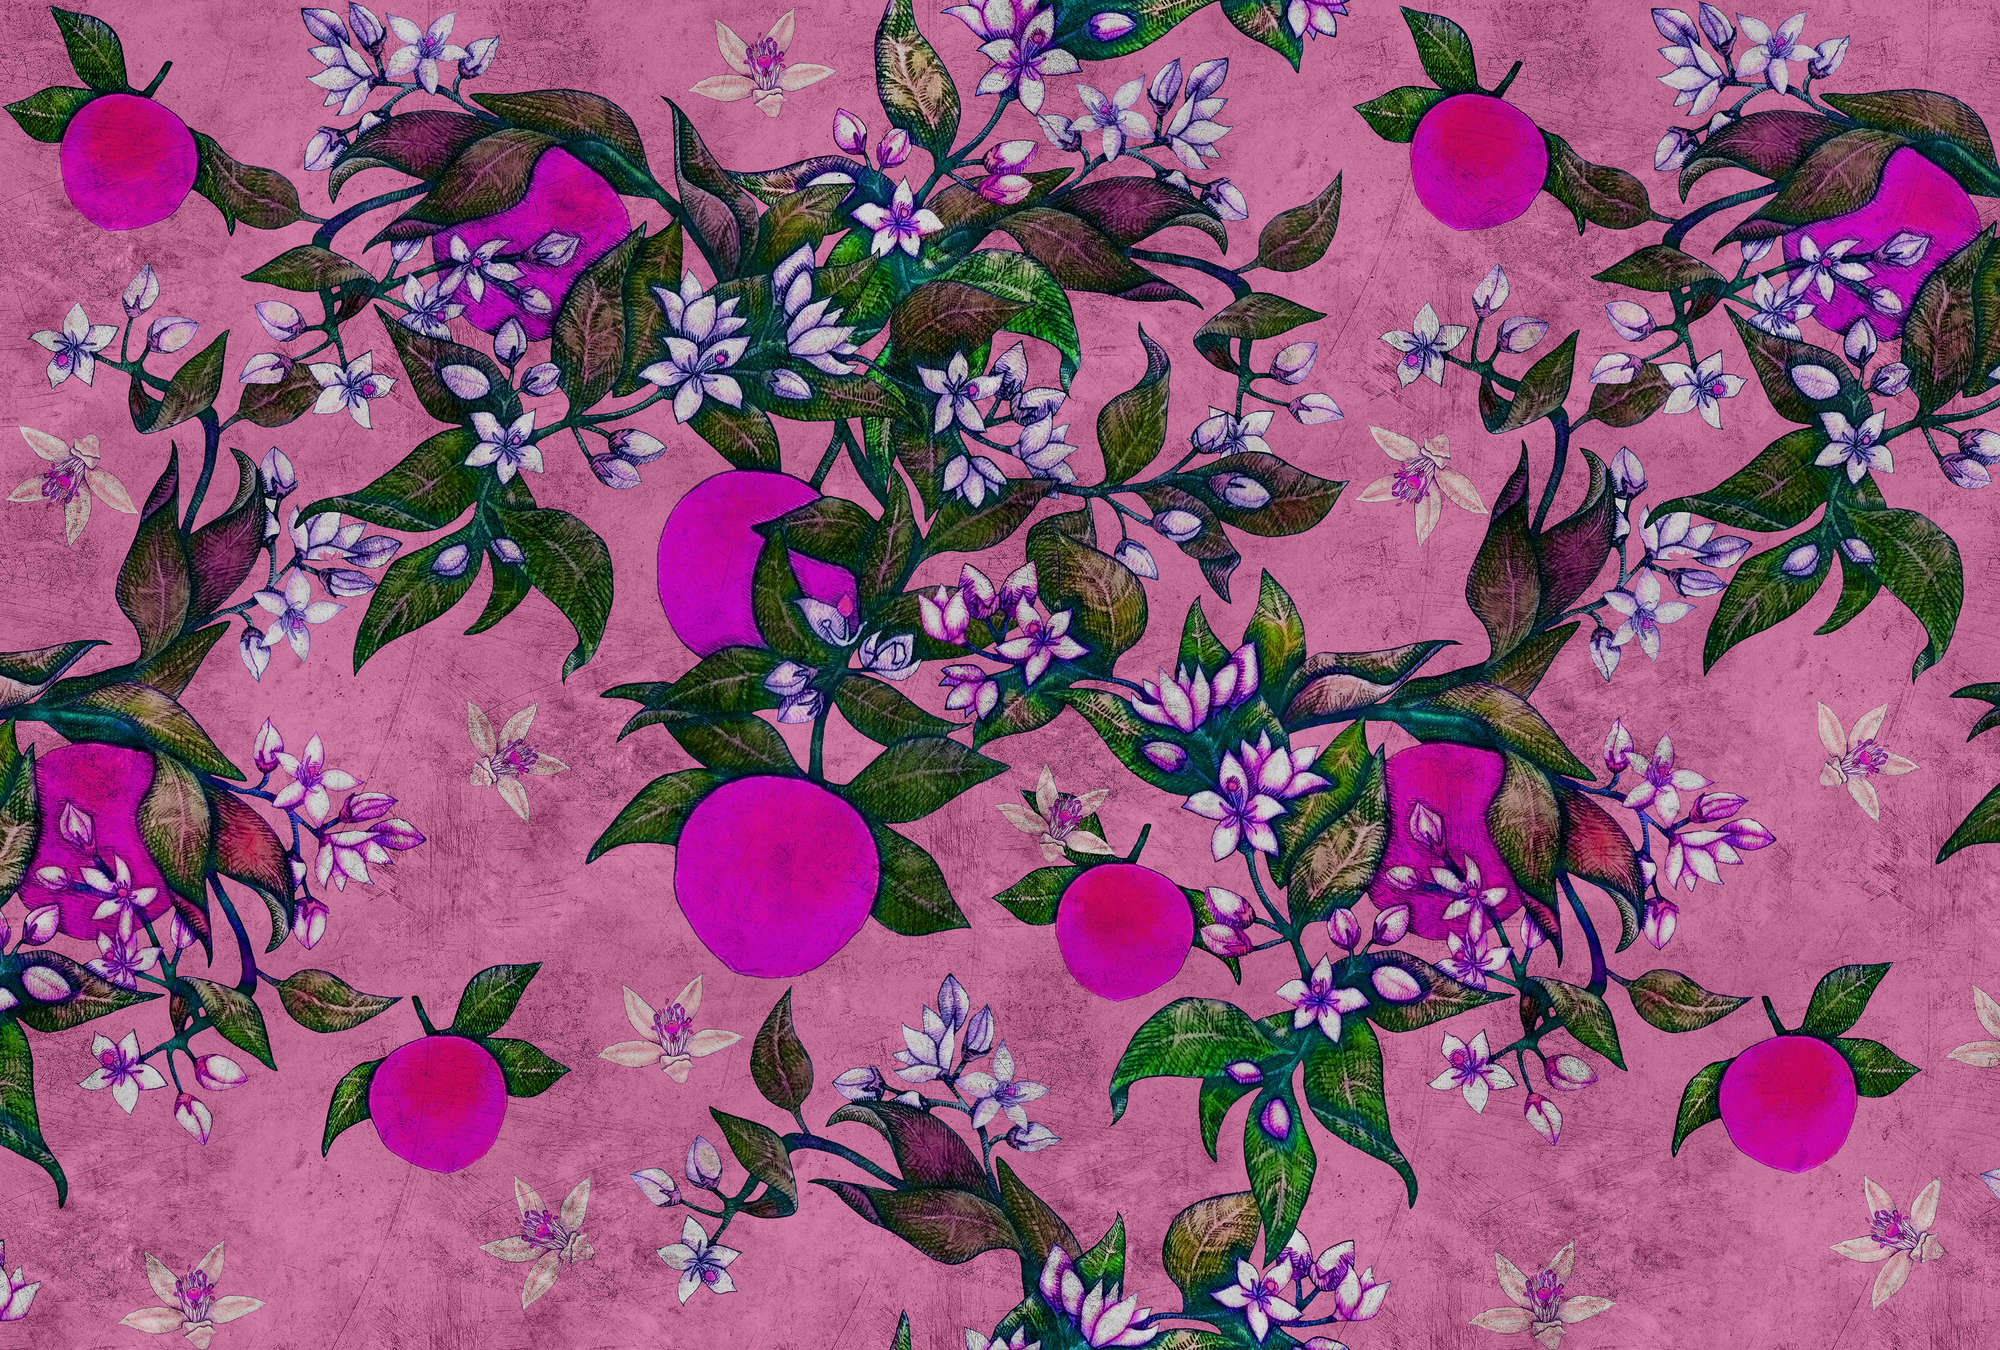             Grapefruit Tree 2 - Photo wallpaper with grapefruit & flower design in scratchy texture - Pink, Purple | Premium smooth non-woven
        